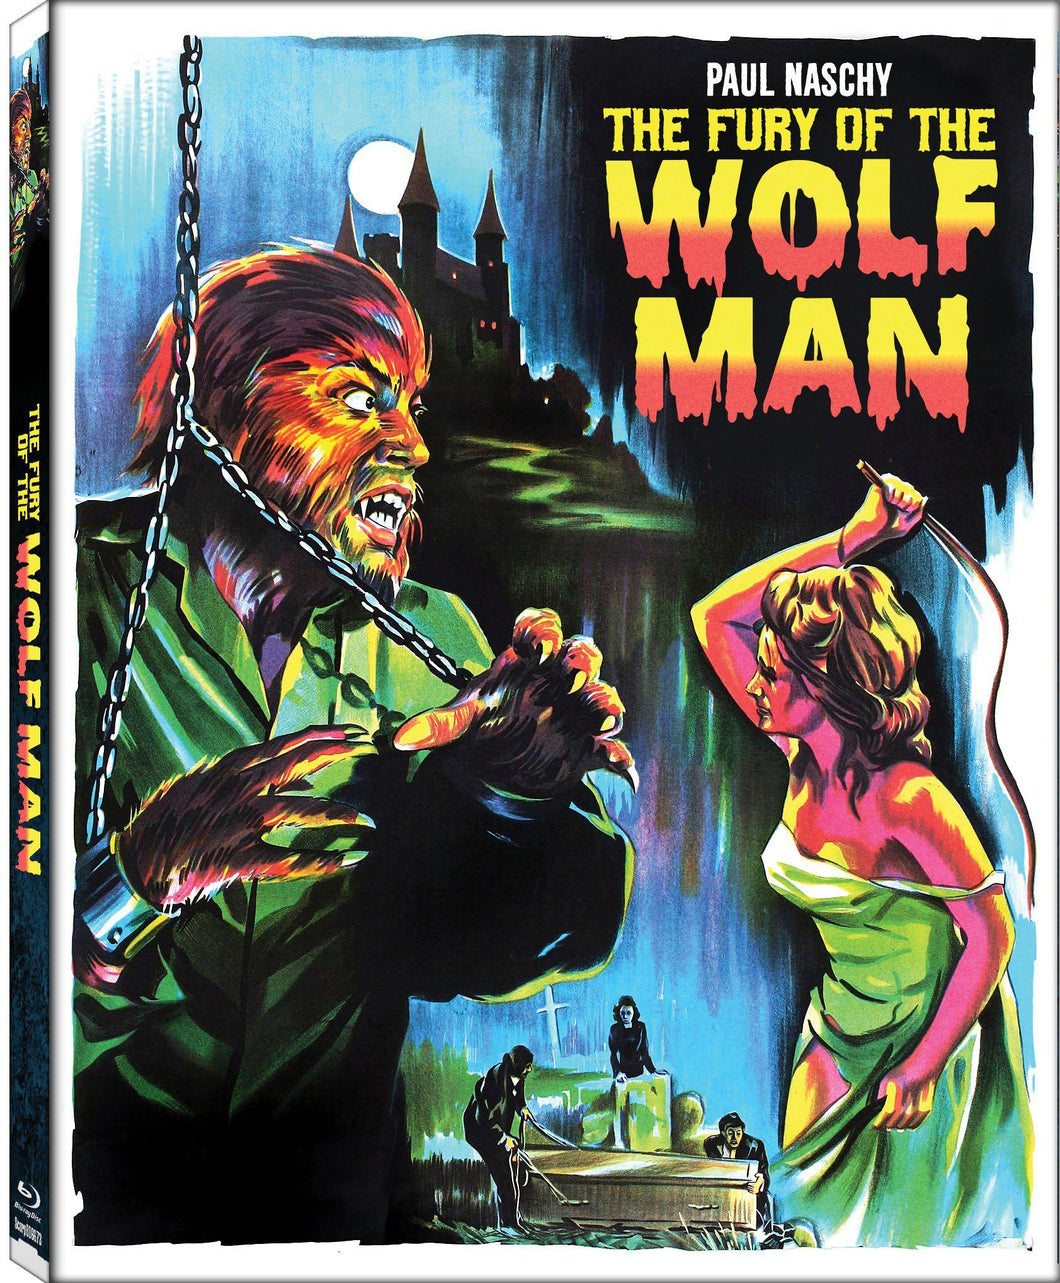 The Fury of the Wolfman (Blu-ray): Ronin Flix - Slipcover